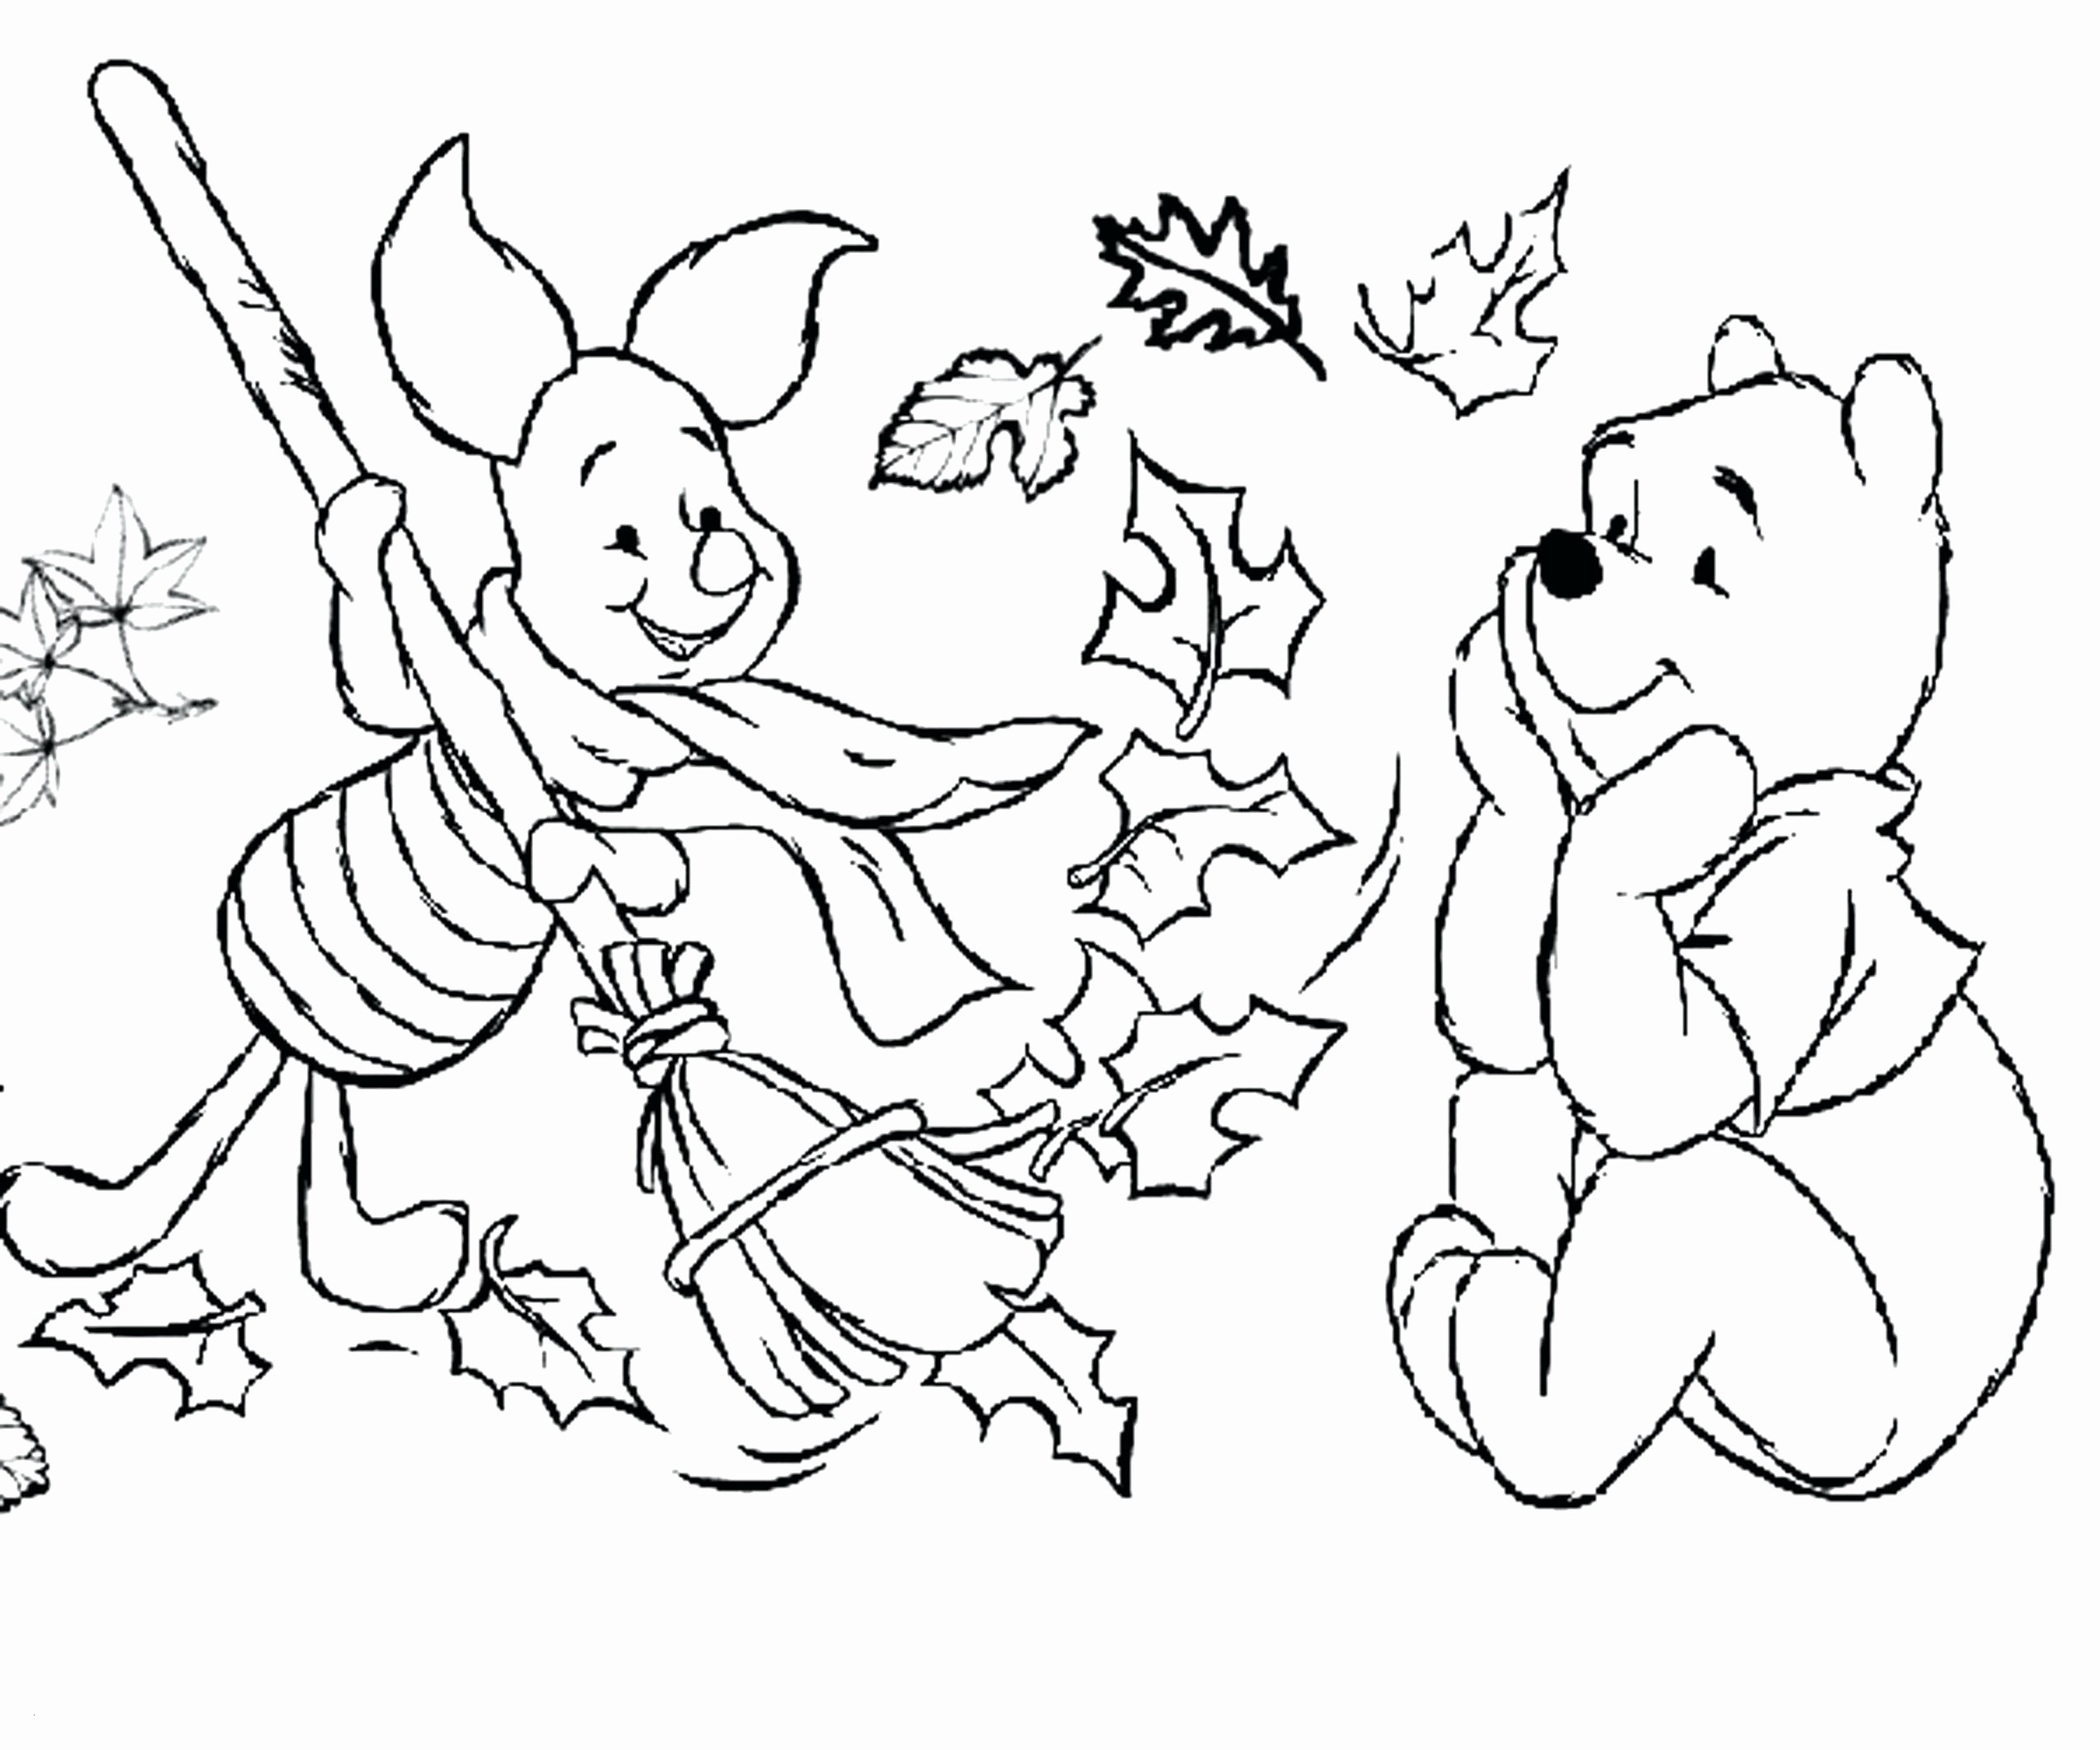 Free Adult Coloring Pages attractive Preschool Fall Coloring Pages 0d Coloring Page Fall Coloring Pages